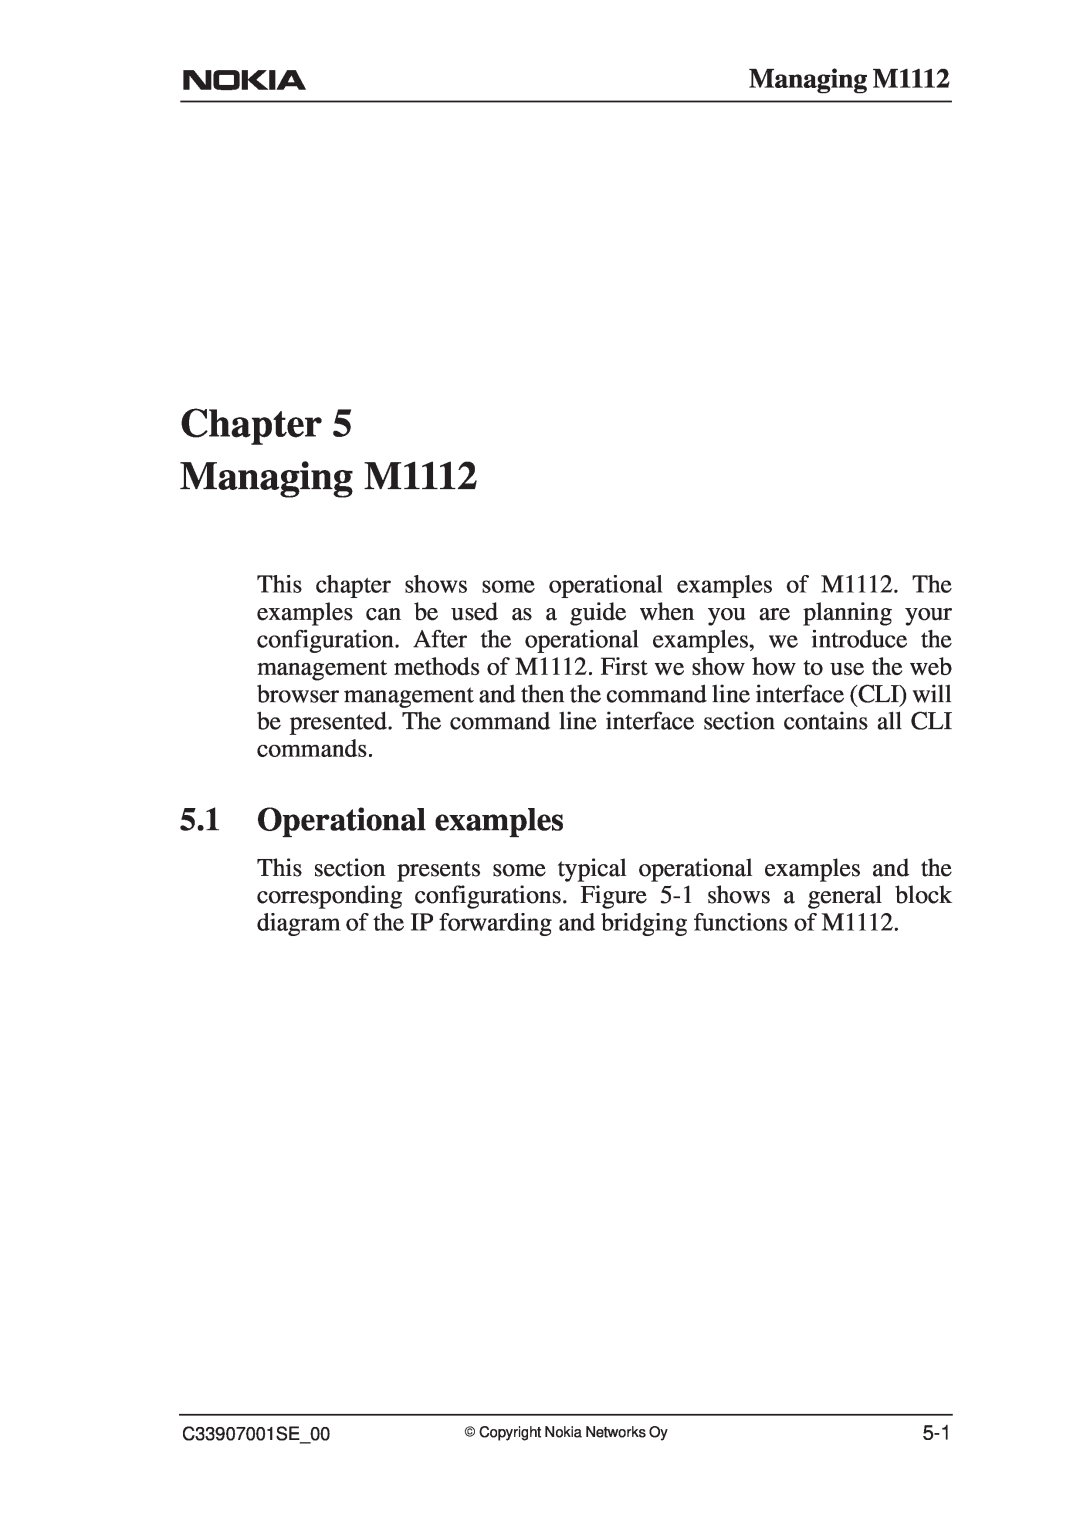 Nokia manual Chapter Managing M1112, Operational examples 